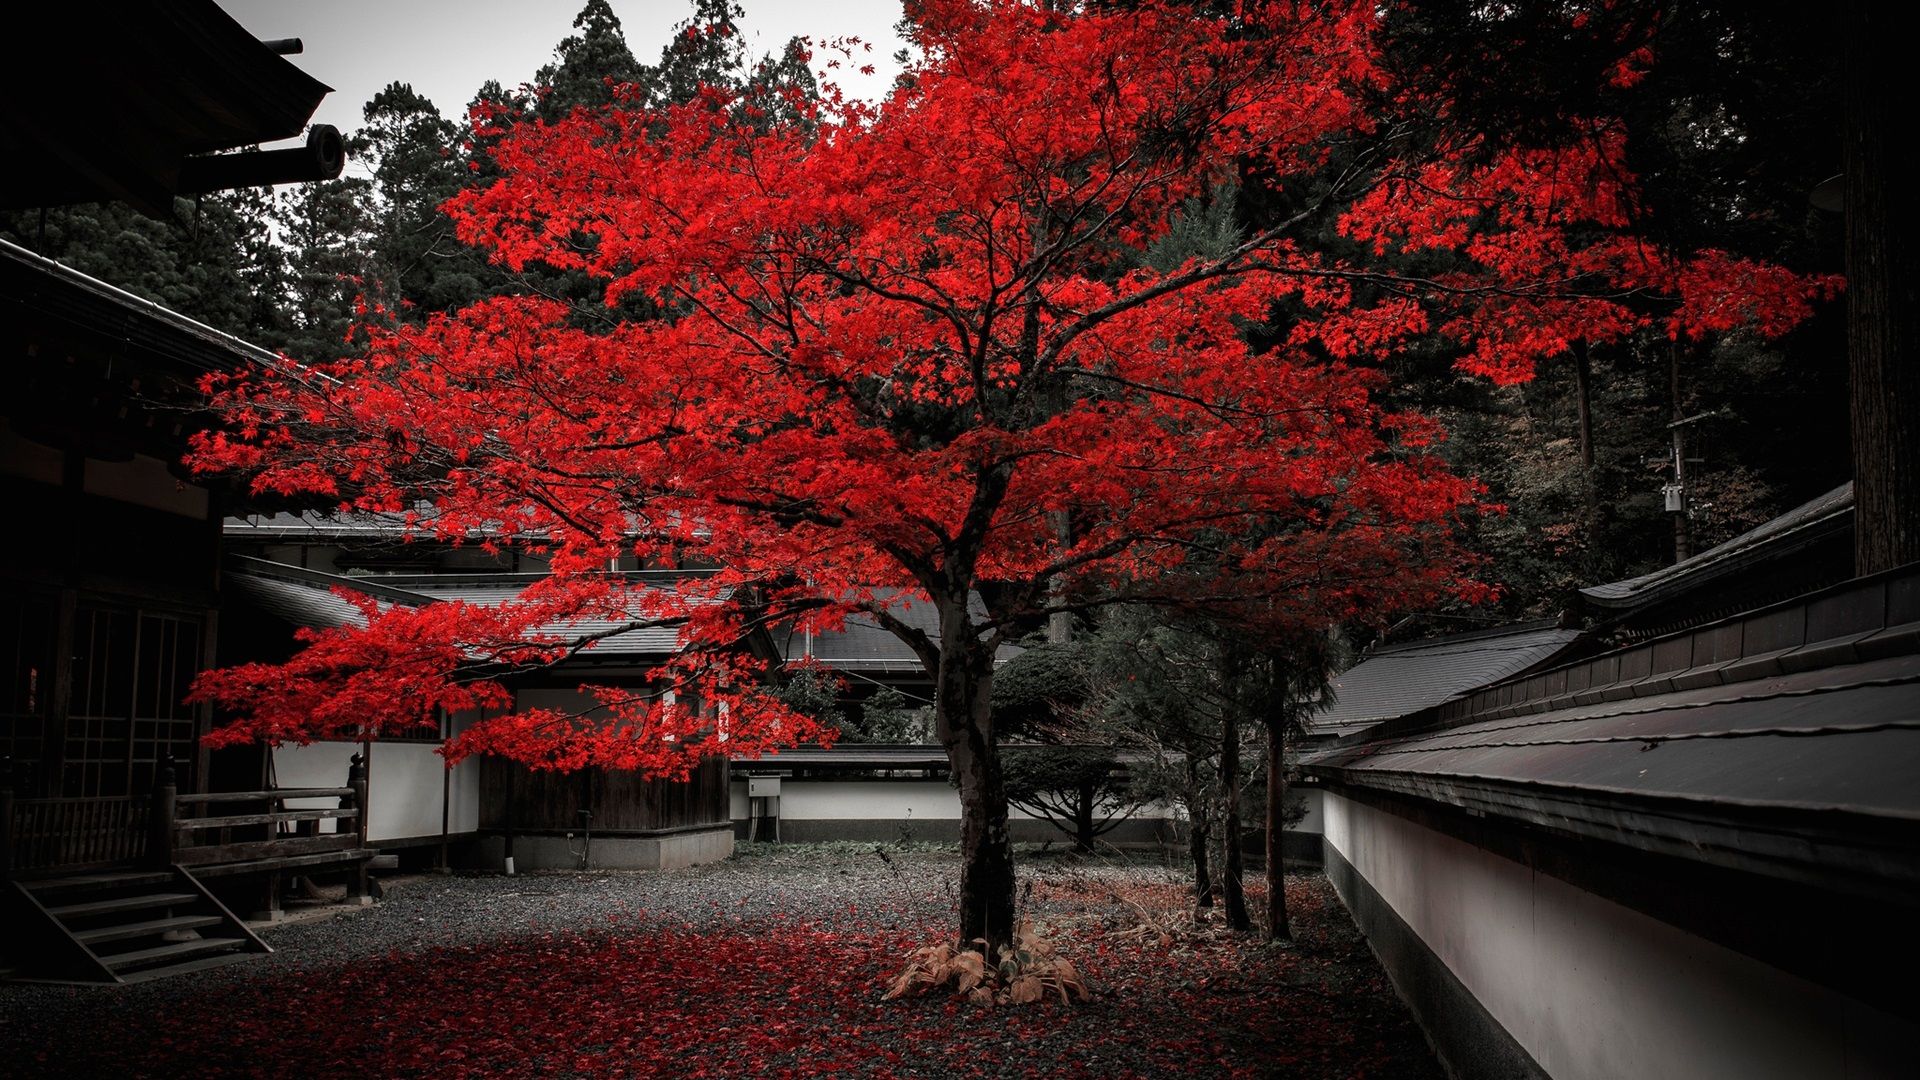 Wallpaper, trees, building, plants, Japan, red leaves, fall 1920x1080